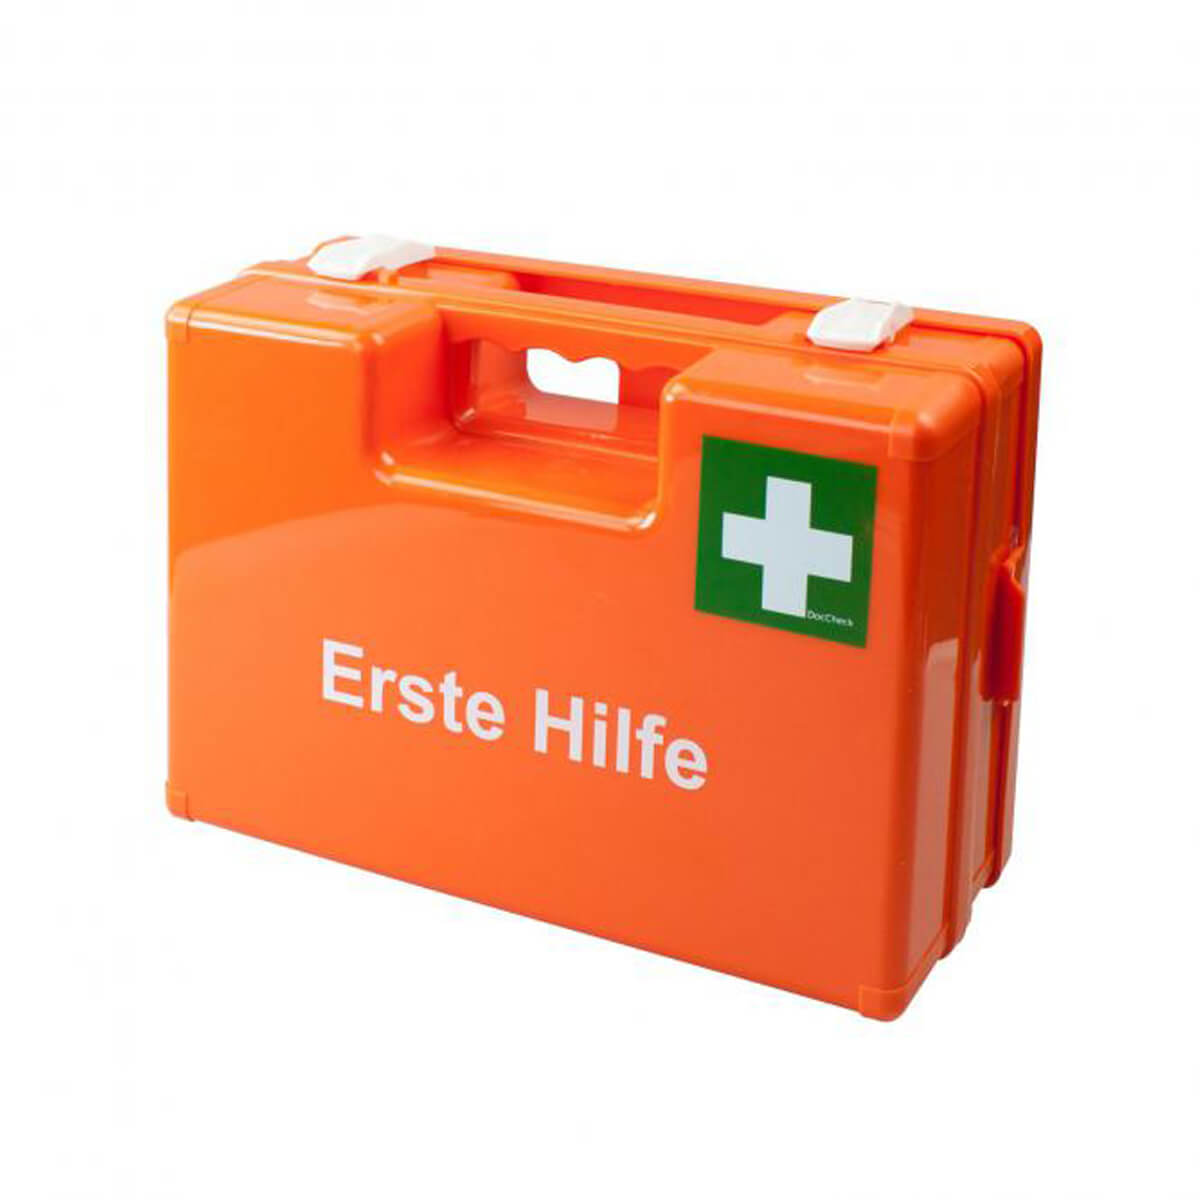 Buy First Aid Suitcases online » DocCheck Shop